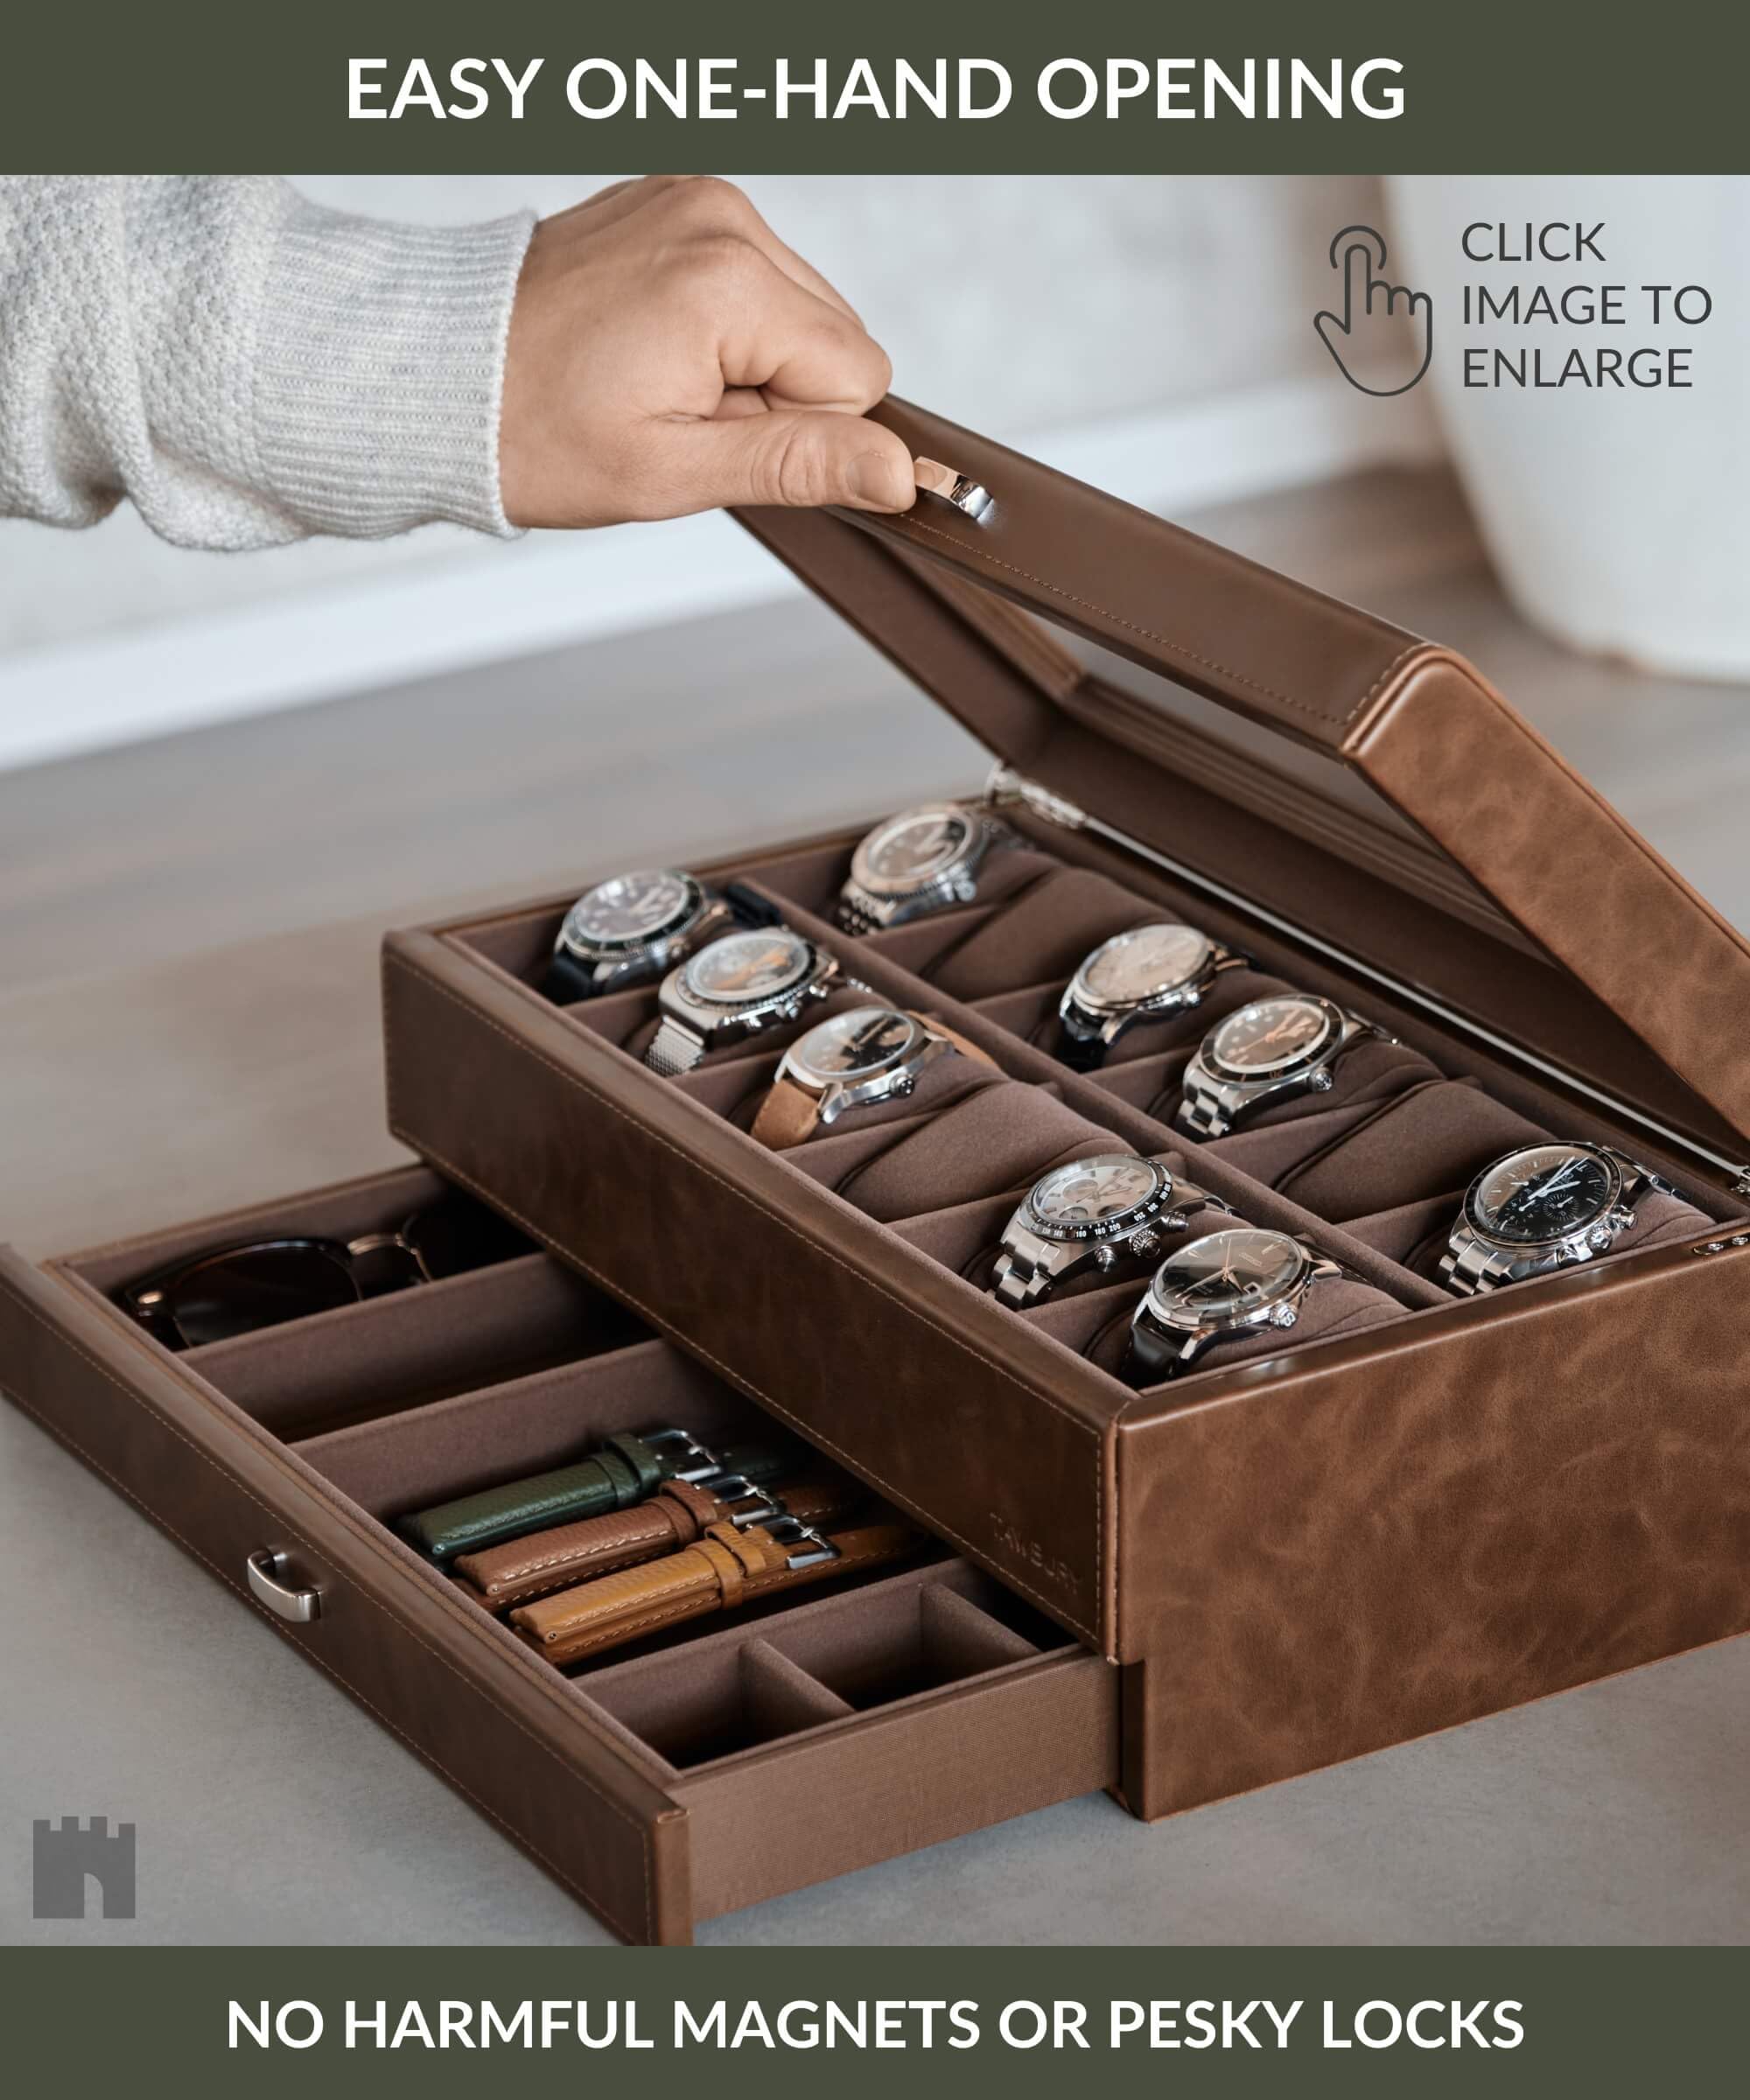 TAWBURY Bayswater 12 Slot Watch Box with Drawer (Brown) with a Set of 12 Extra-Small Pillows to Fit 5.5-6.5